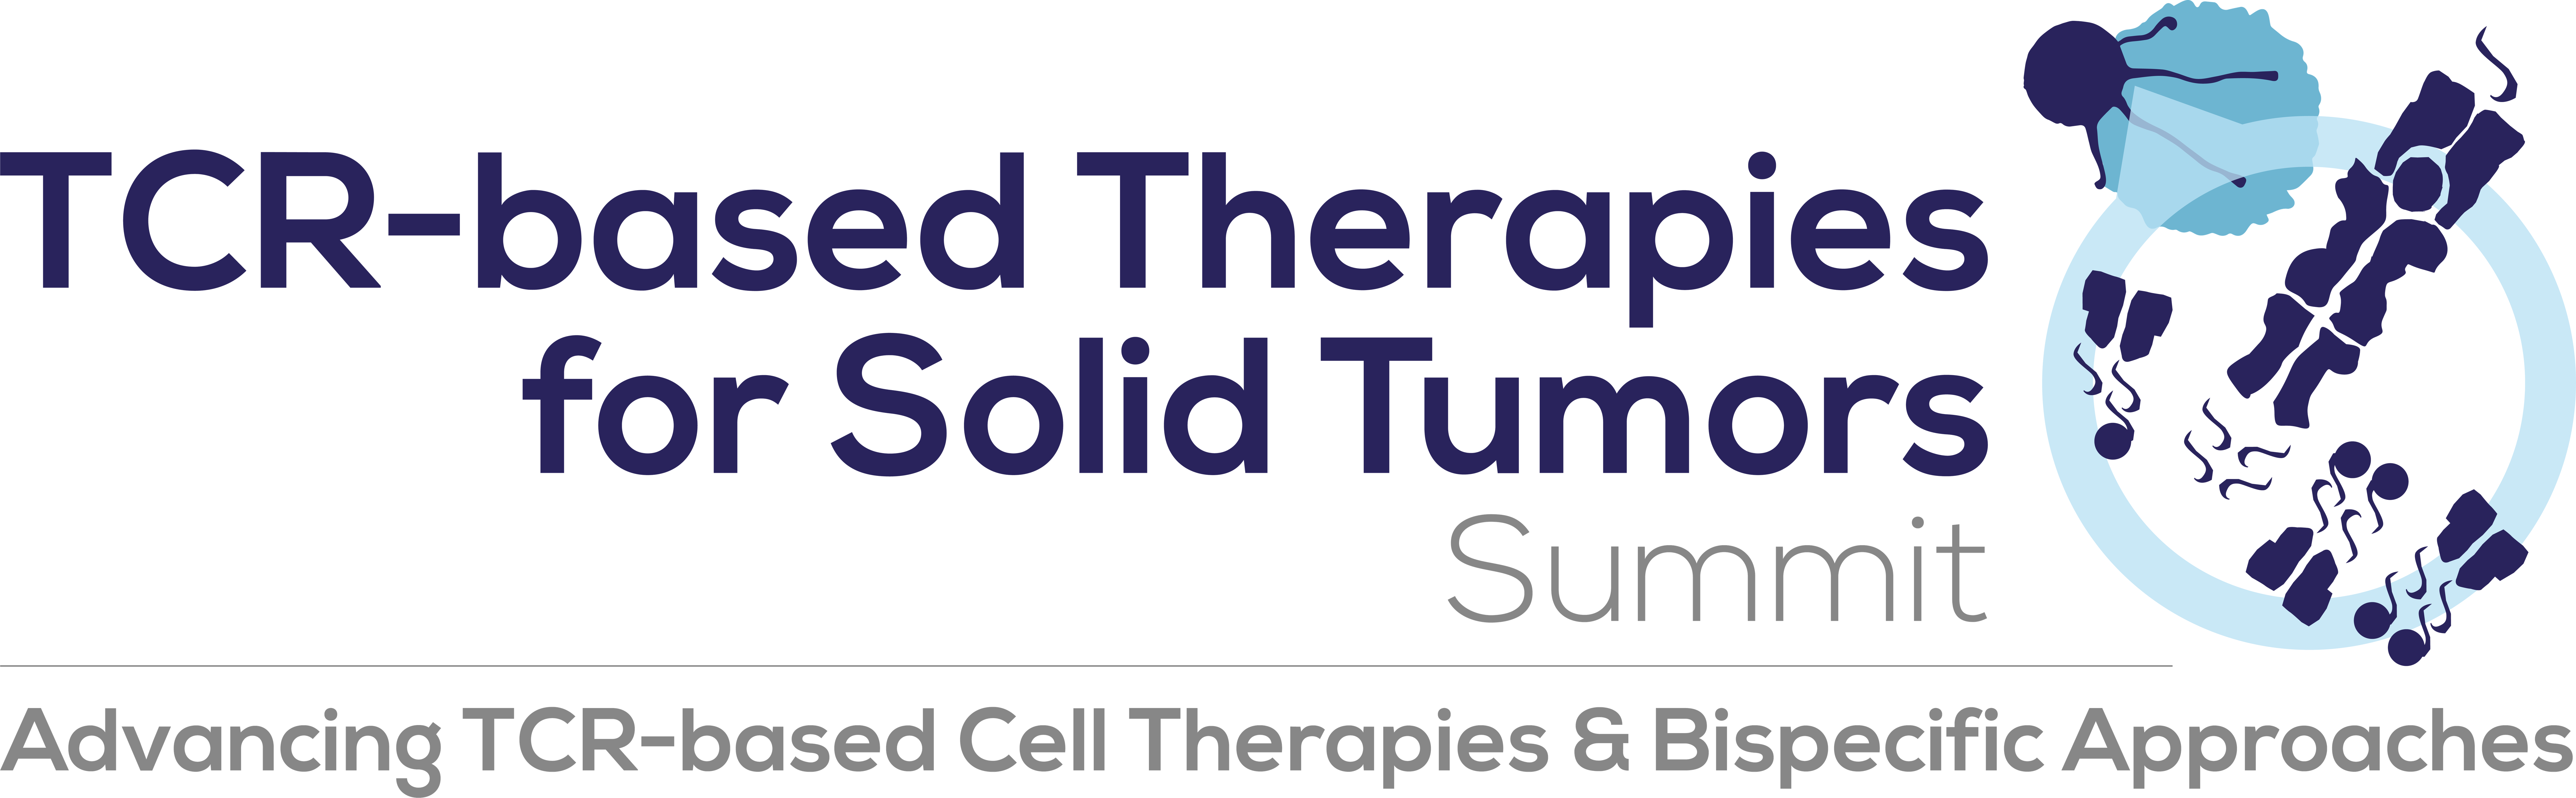 TCR-based Therapies for Solid Tumors Summit logo WITH TAG